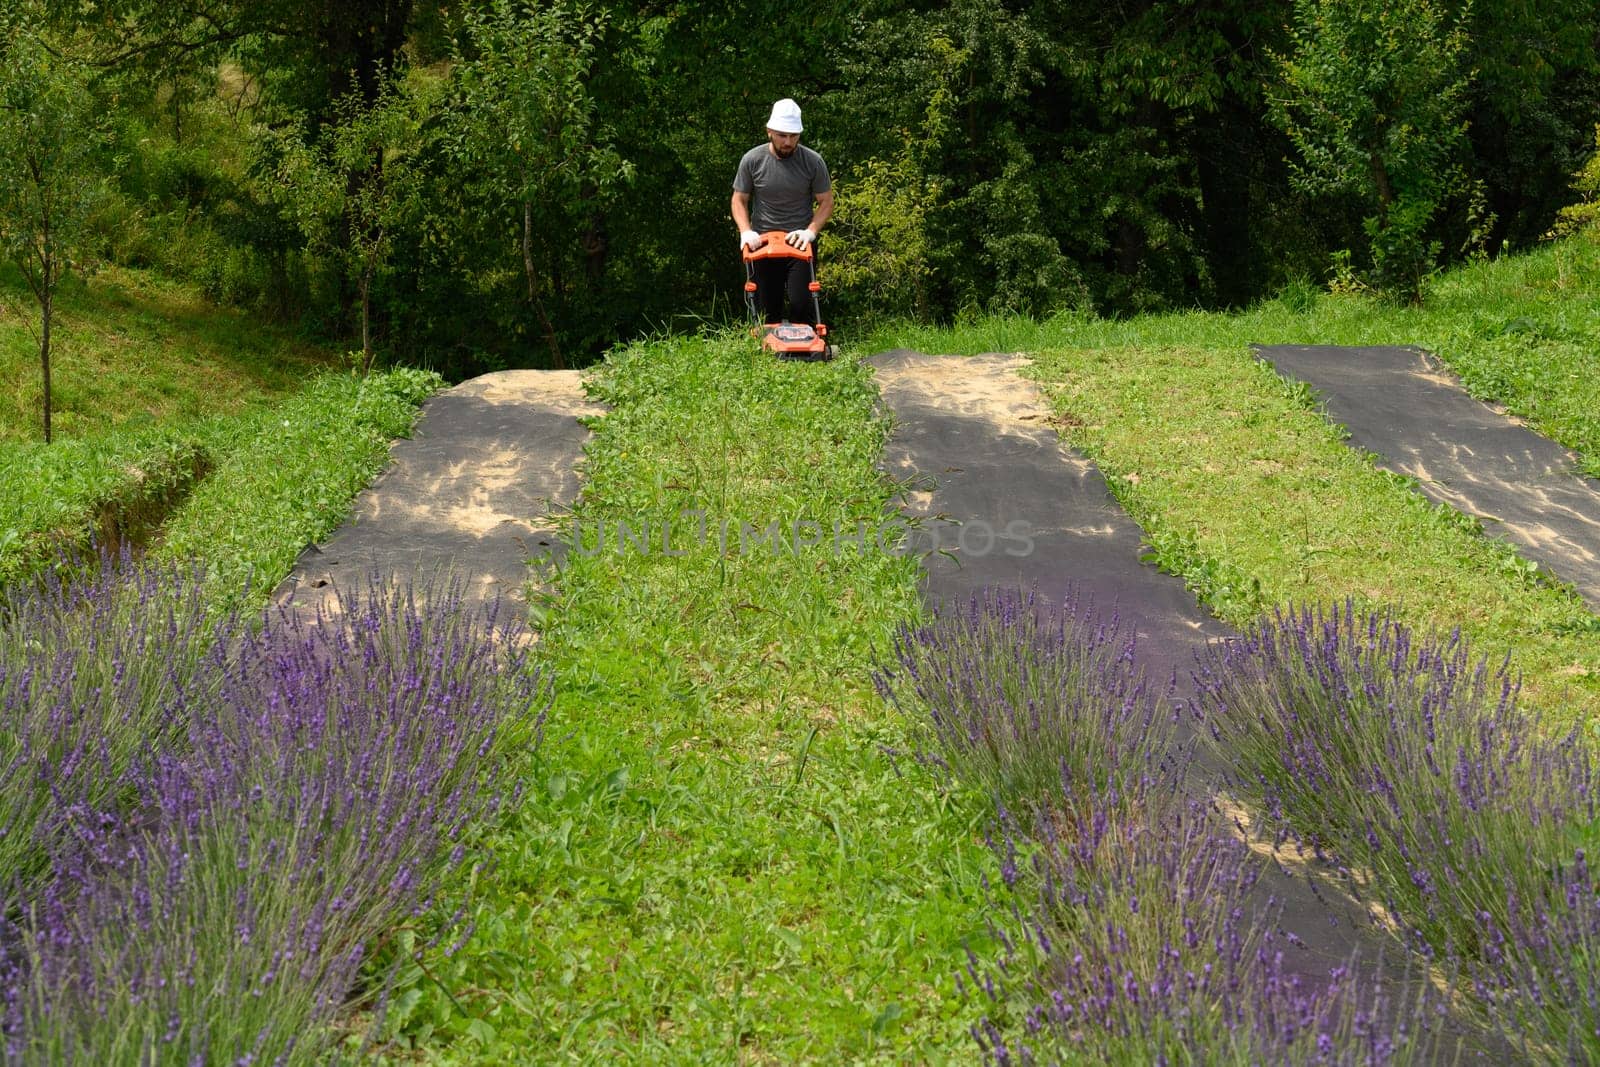 Working in the garden with a lawnmower, the gardener mows the grass between the lavender bushes. by Niko_Cingaryuk